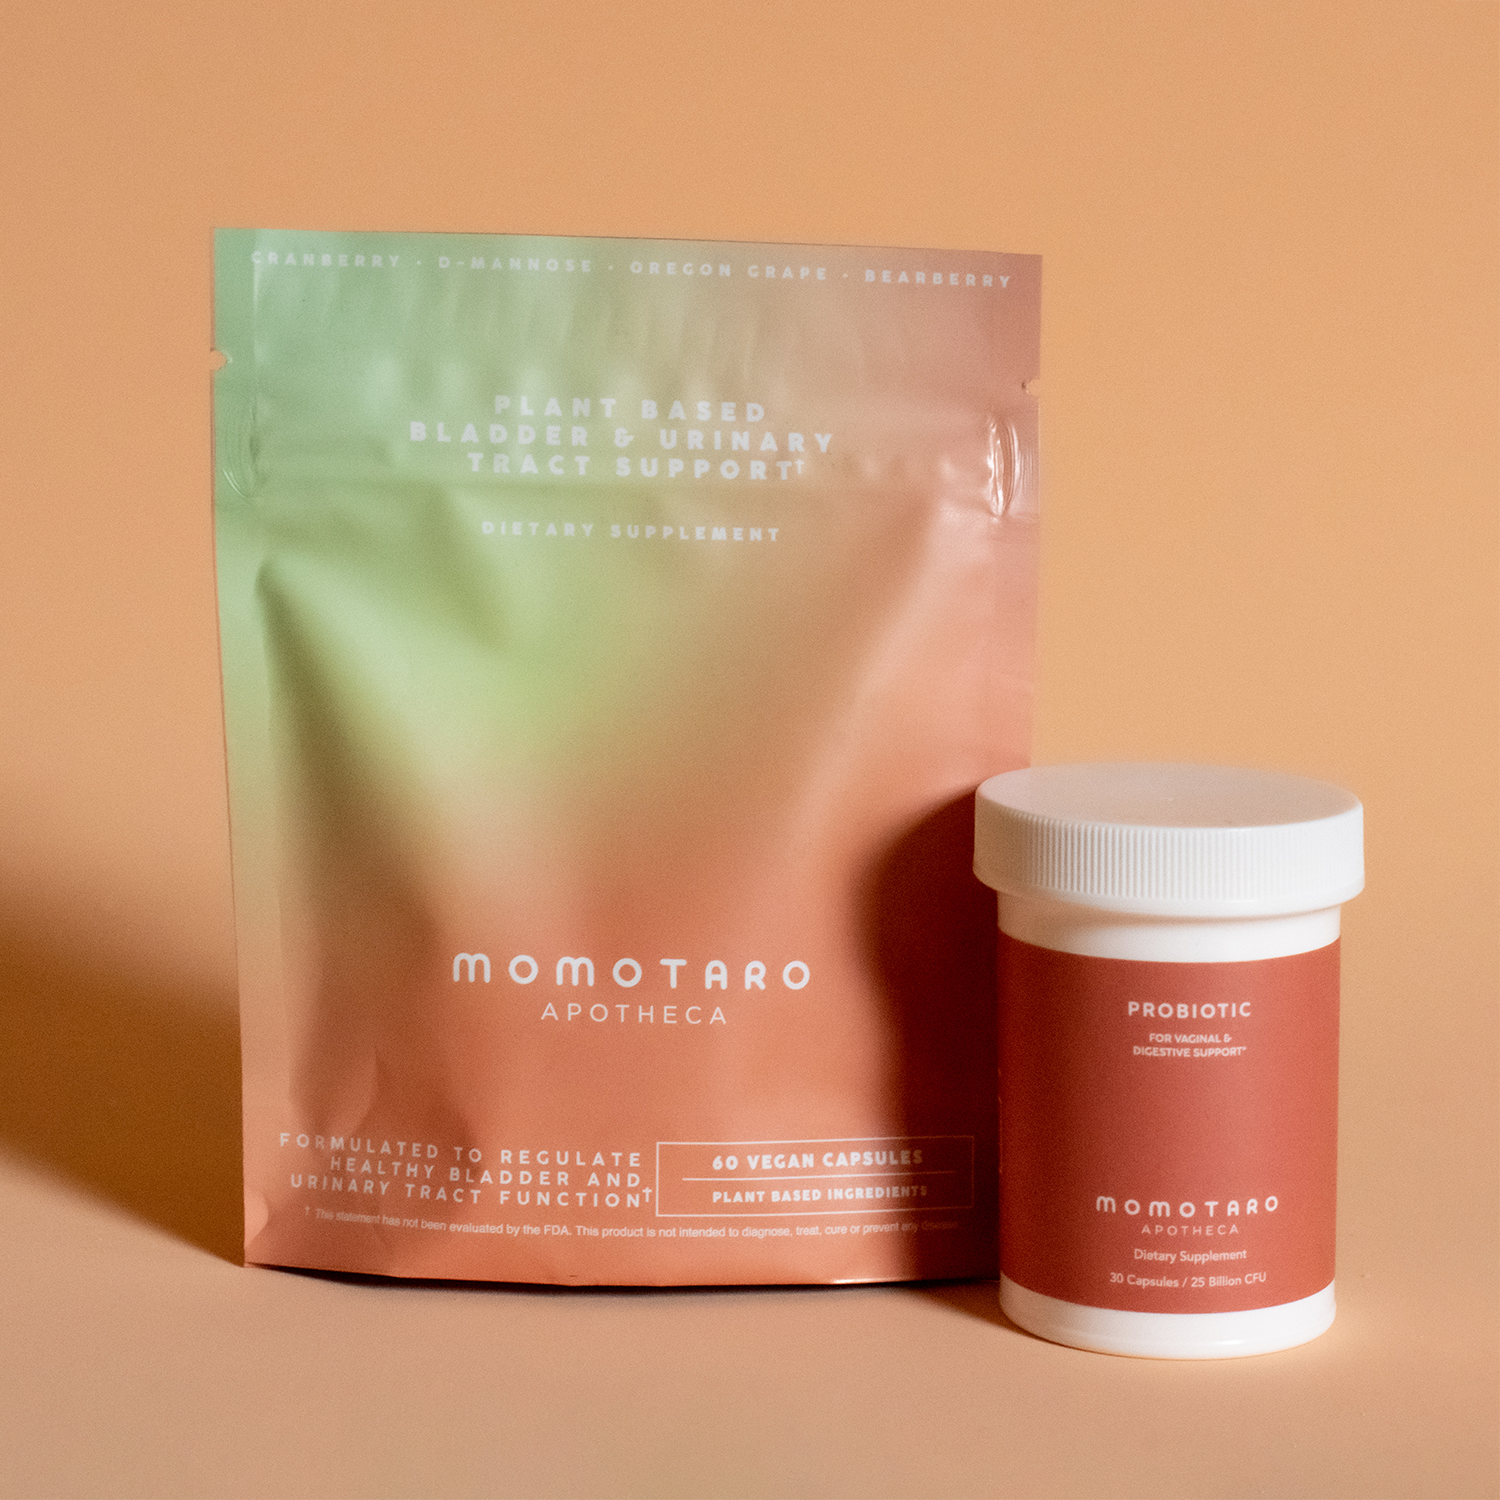 Momotaro Apotheca's UTI Bundle for Bladder and Urinary Tract Support